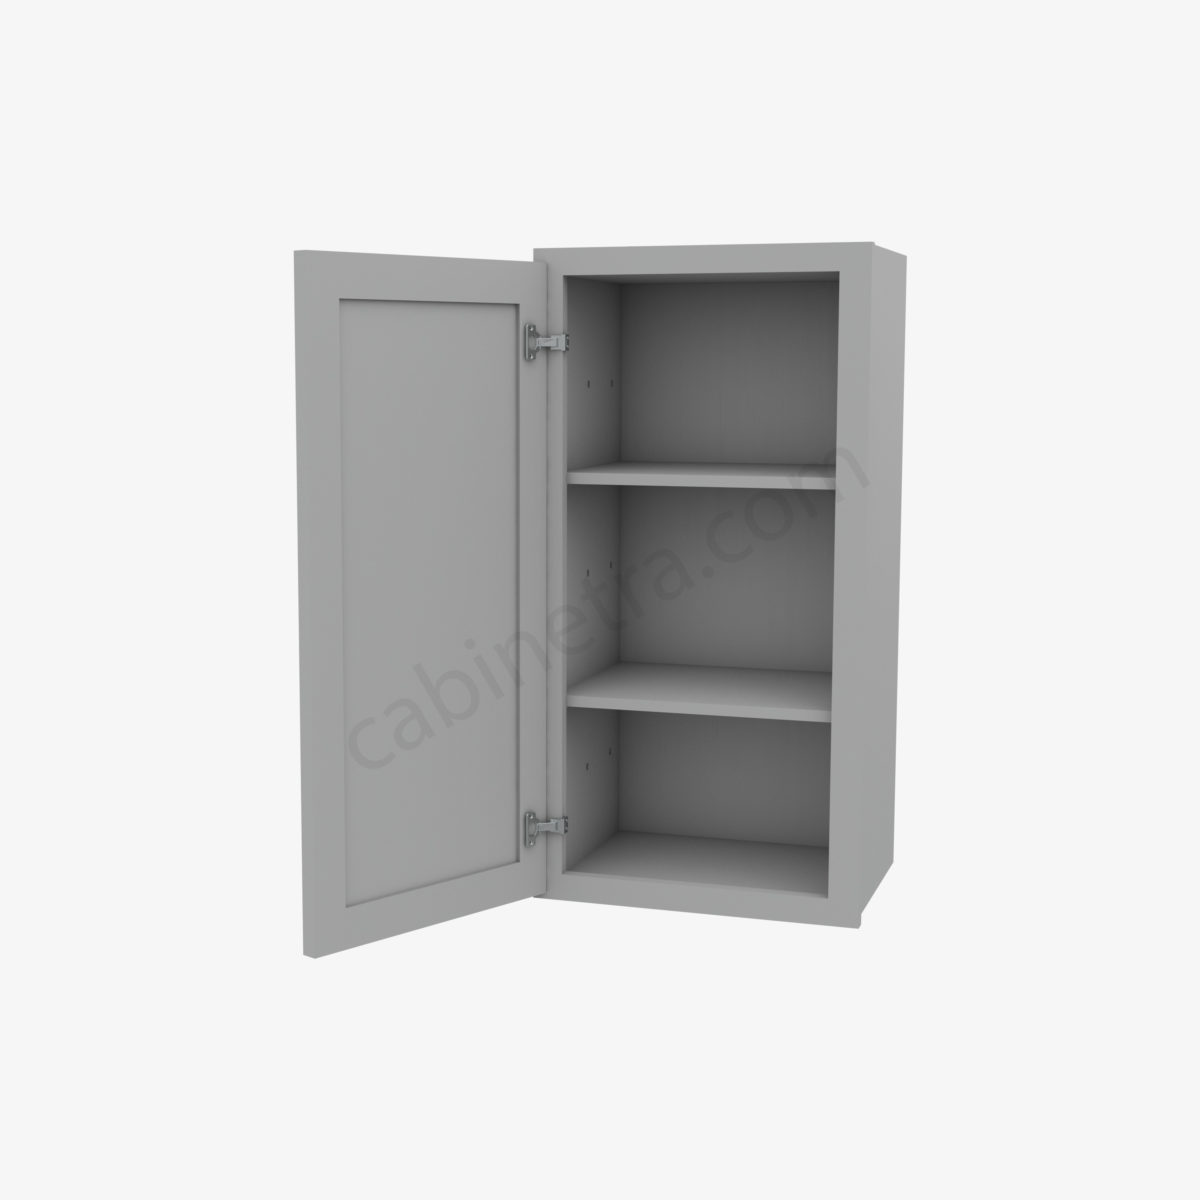 AB W1530 5 Forevermark Lait Gray Shaker Cabinetra scaled